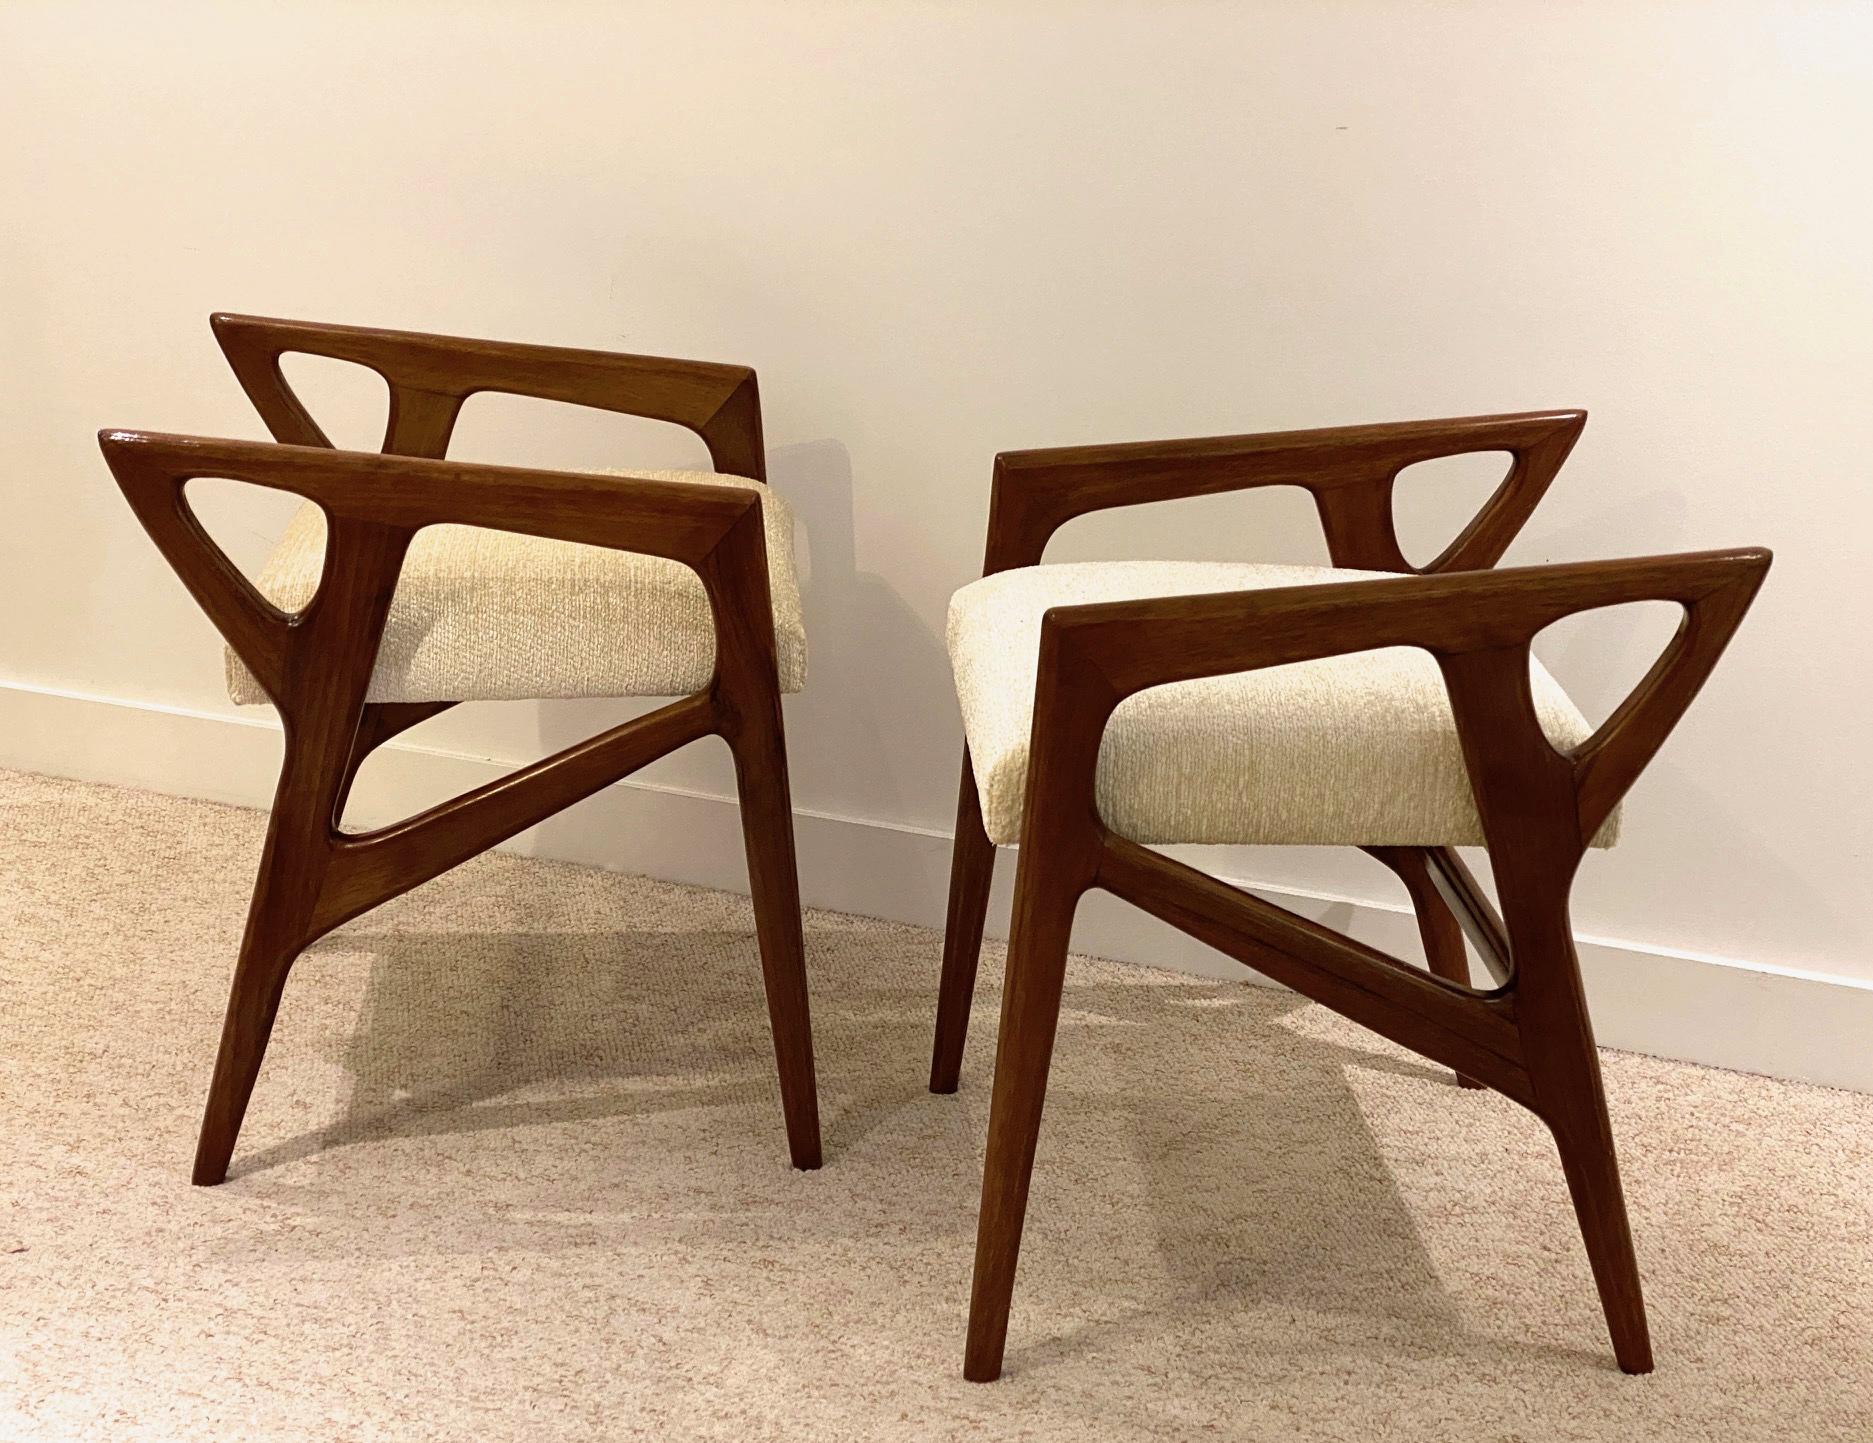 Pair of sculptural stools designed by Italian master Architect Gio Ponti: Walnut structure with upholstered seats. 1950's
Angular forms in walnut with beige velvet Pierre Frey upholstered seats.
 